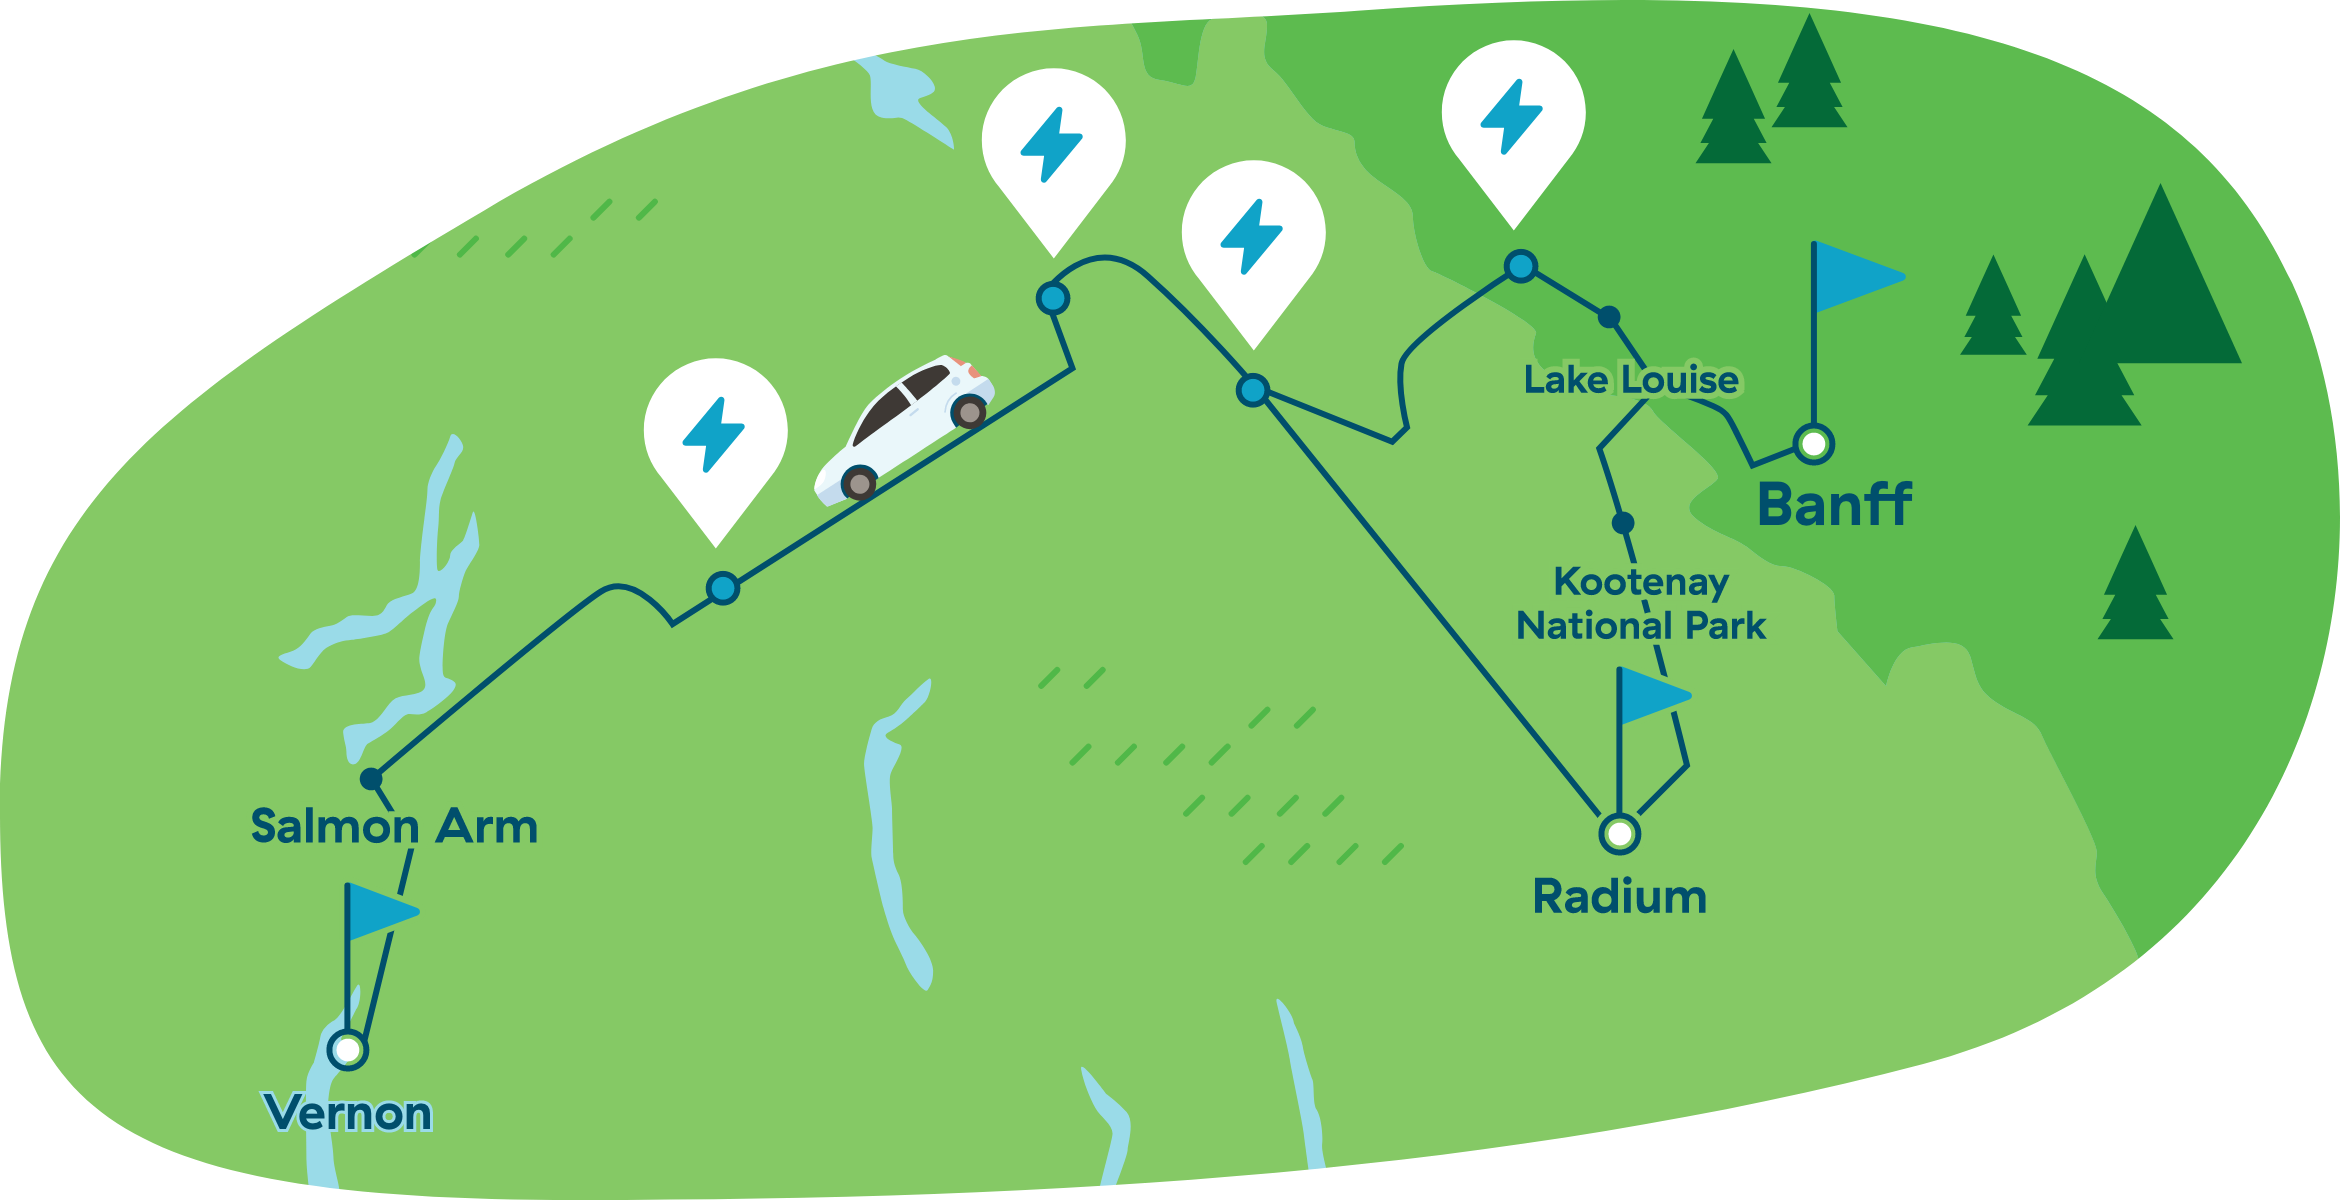 Map of driving from Vernon to Banff and Radium